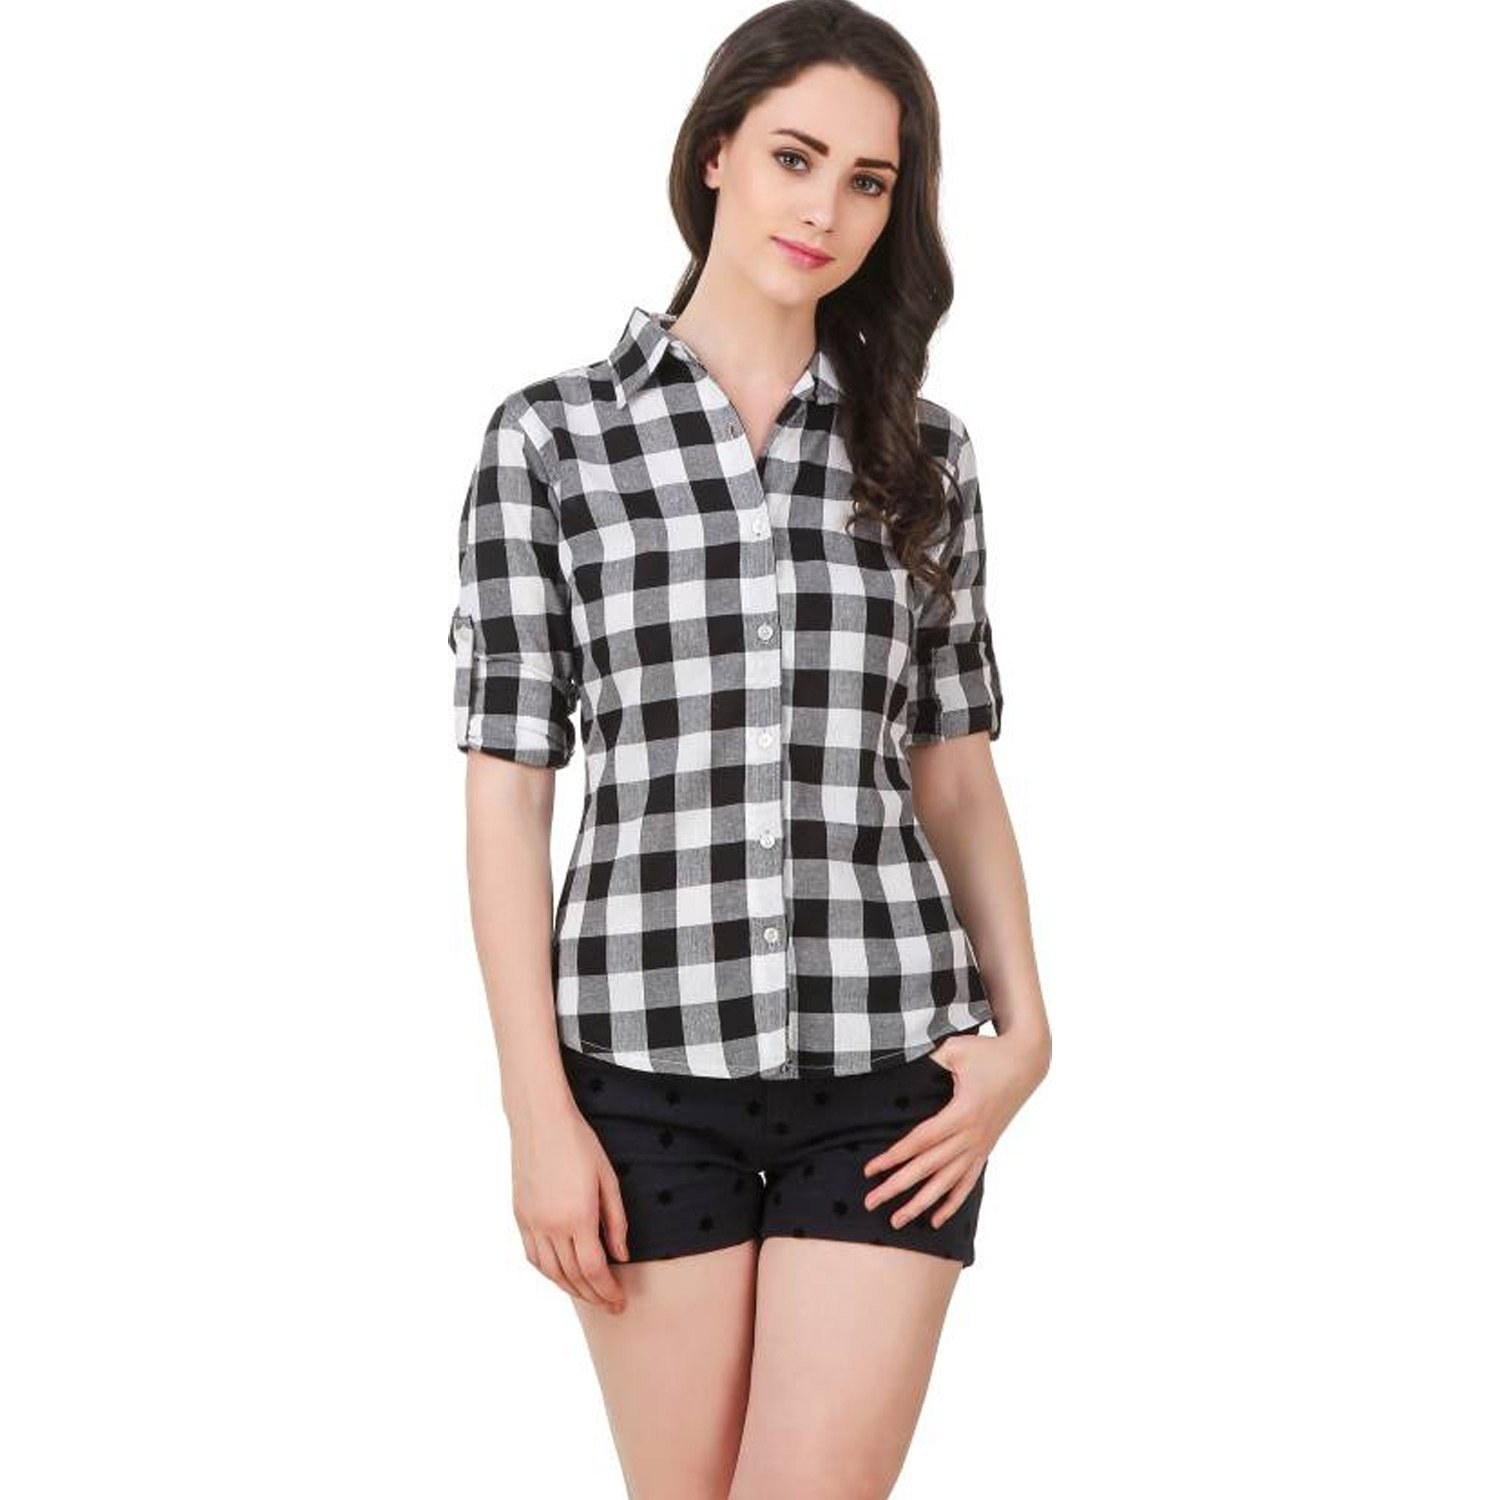 A woman wearing black and white flannel shirt with shorts